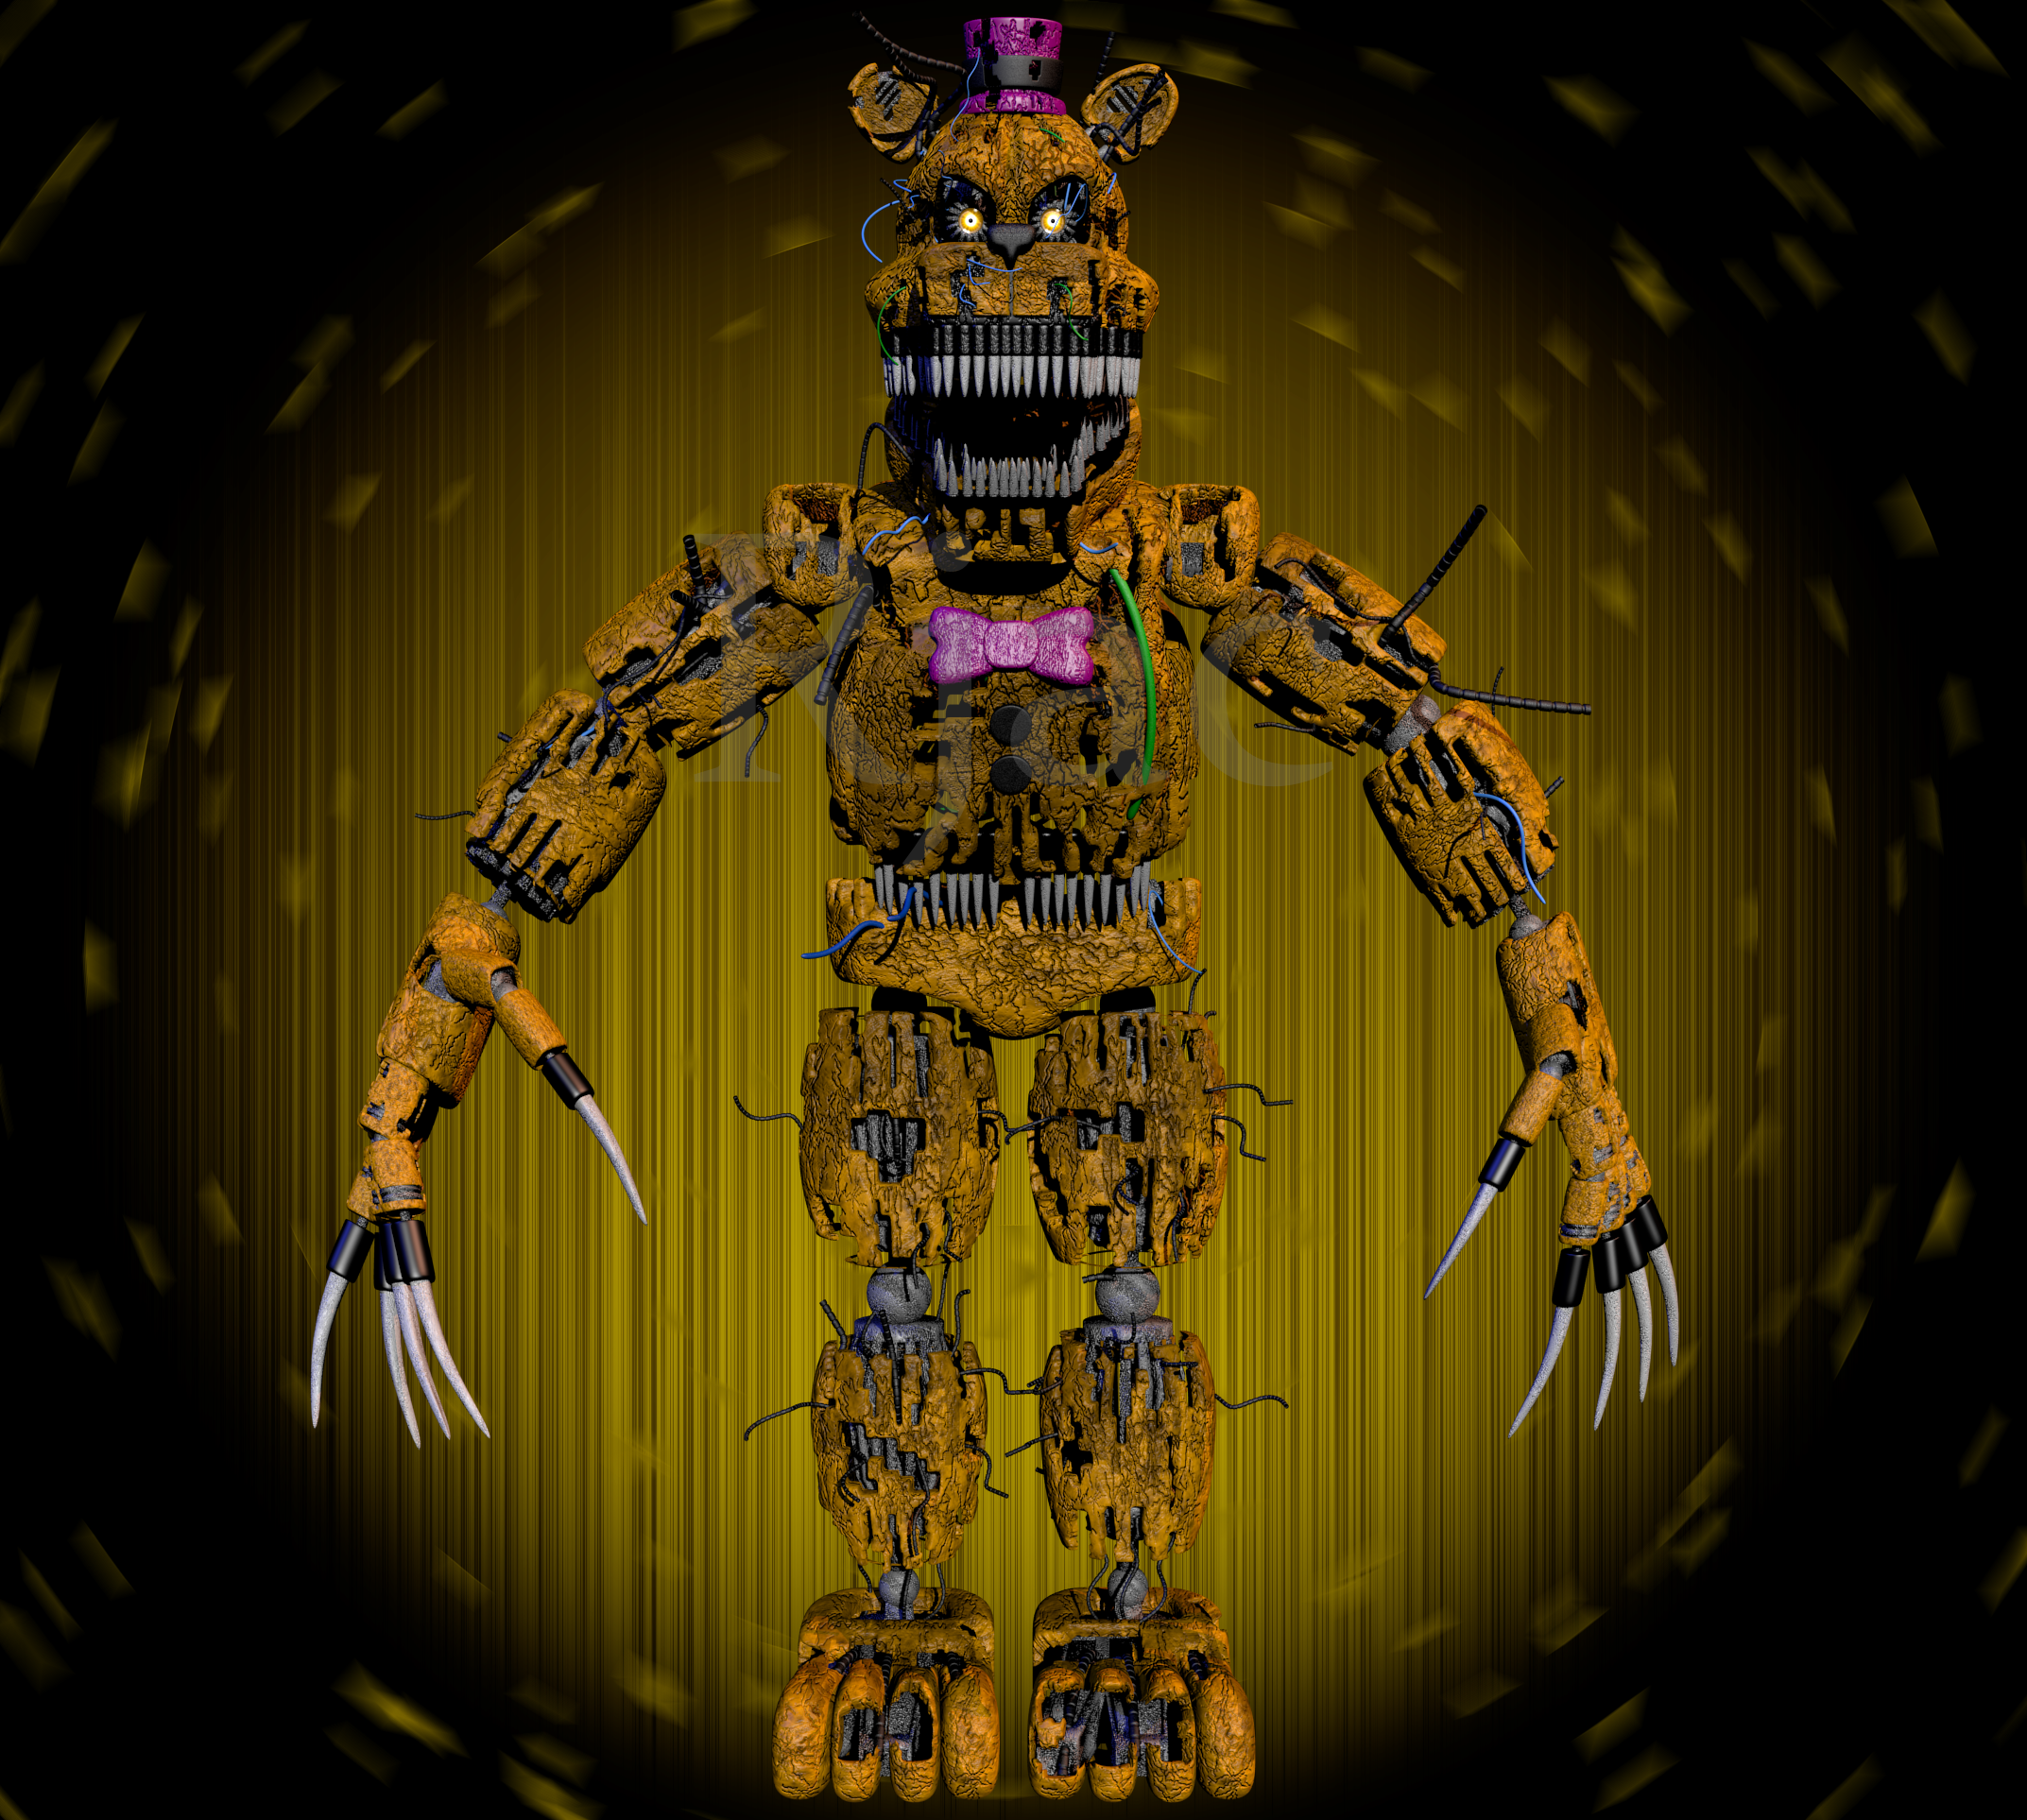 Colors Live - Nightmare fredbear by _-Toast-Addict-_86_